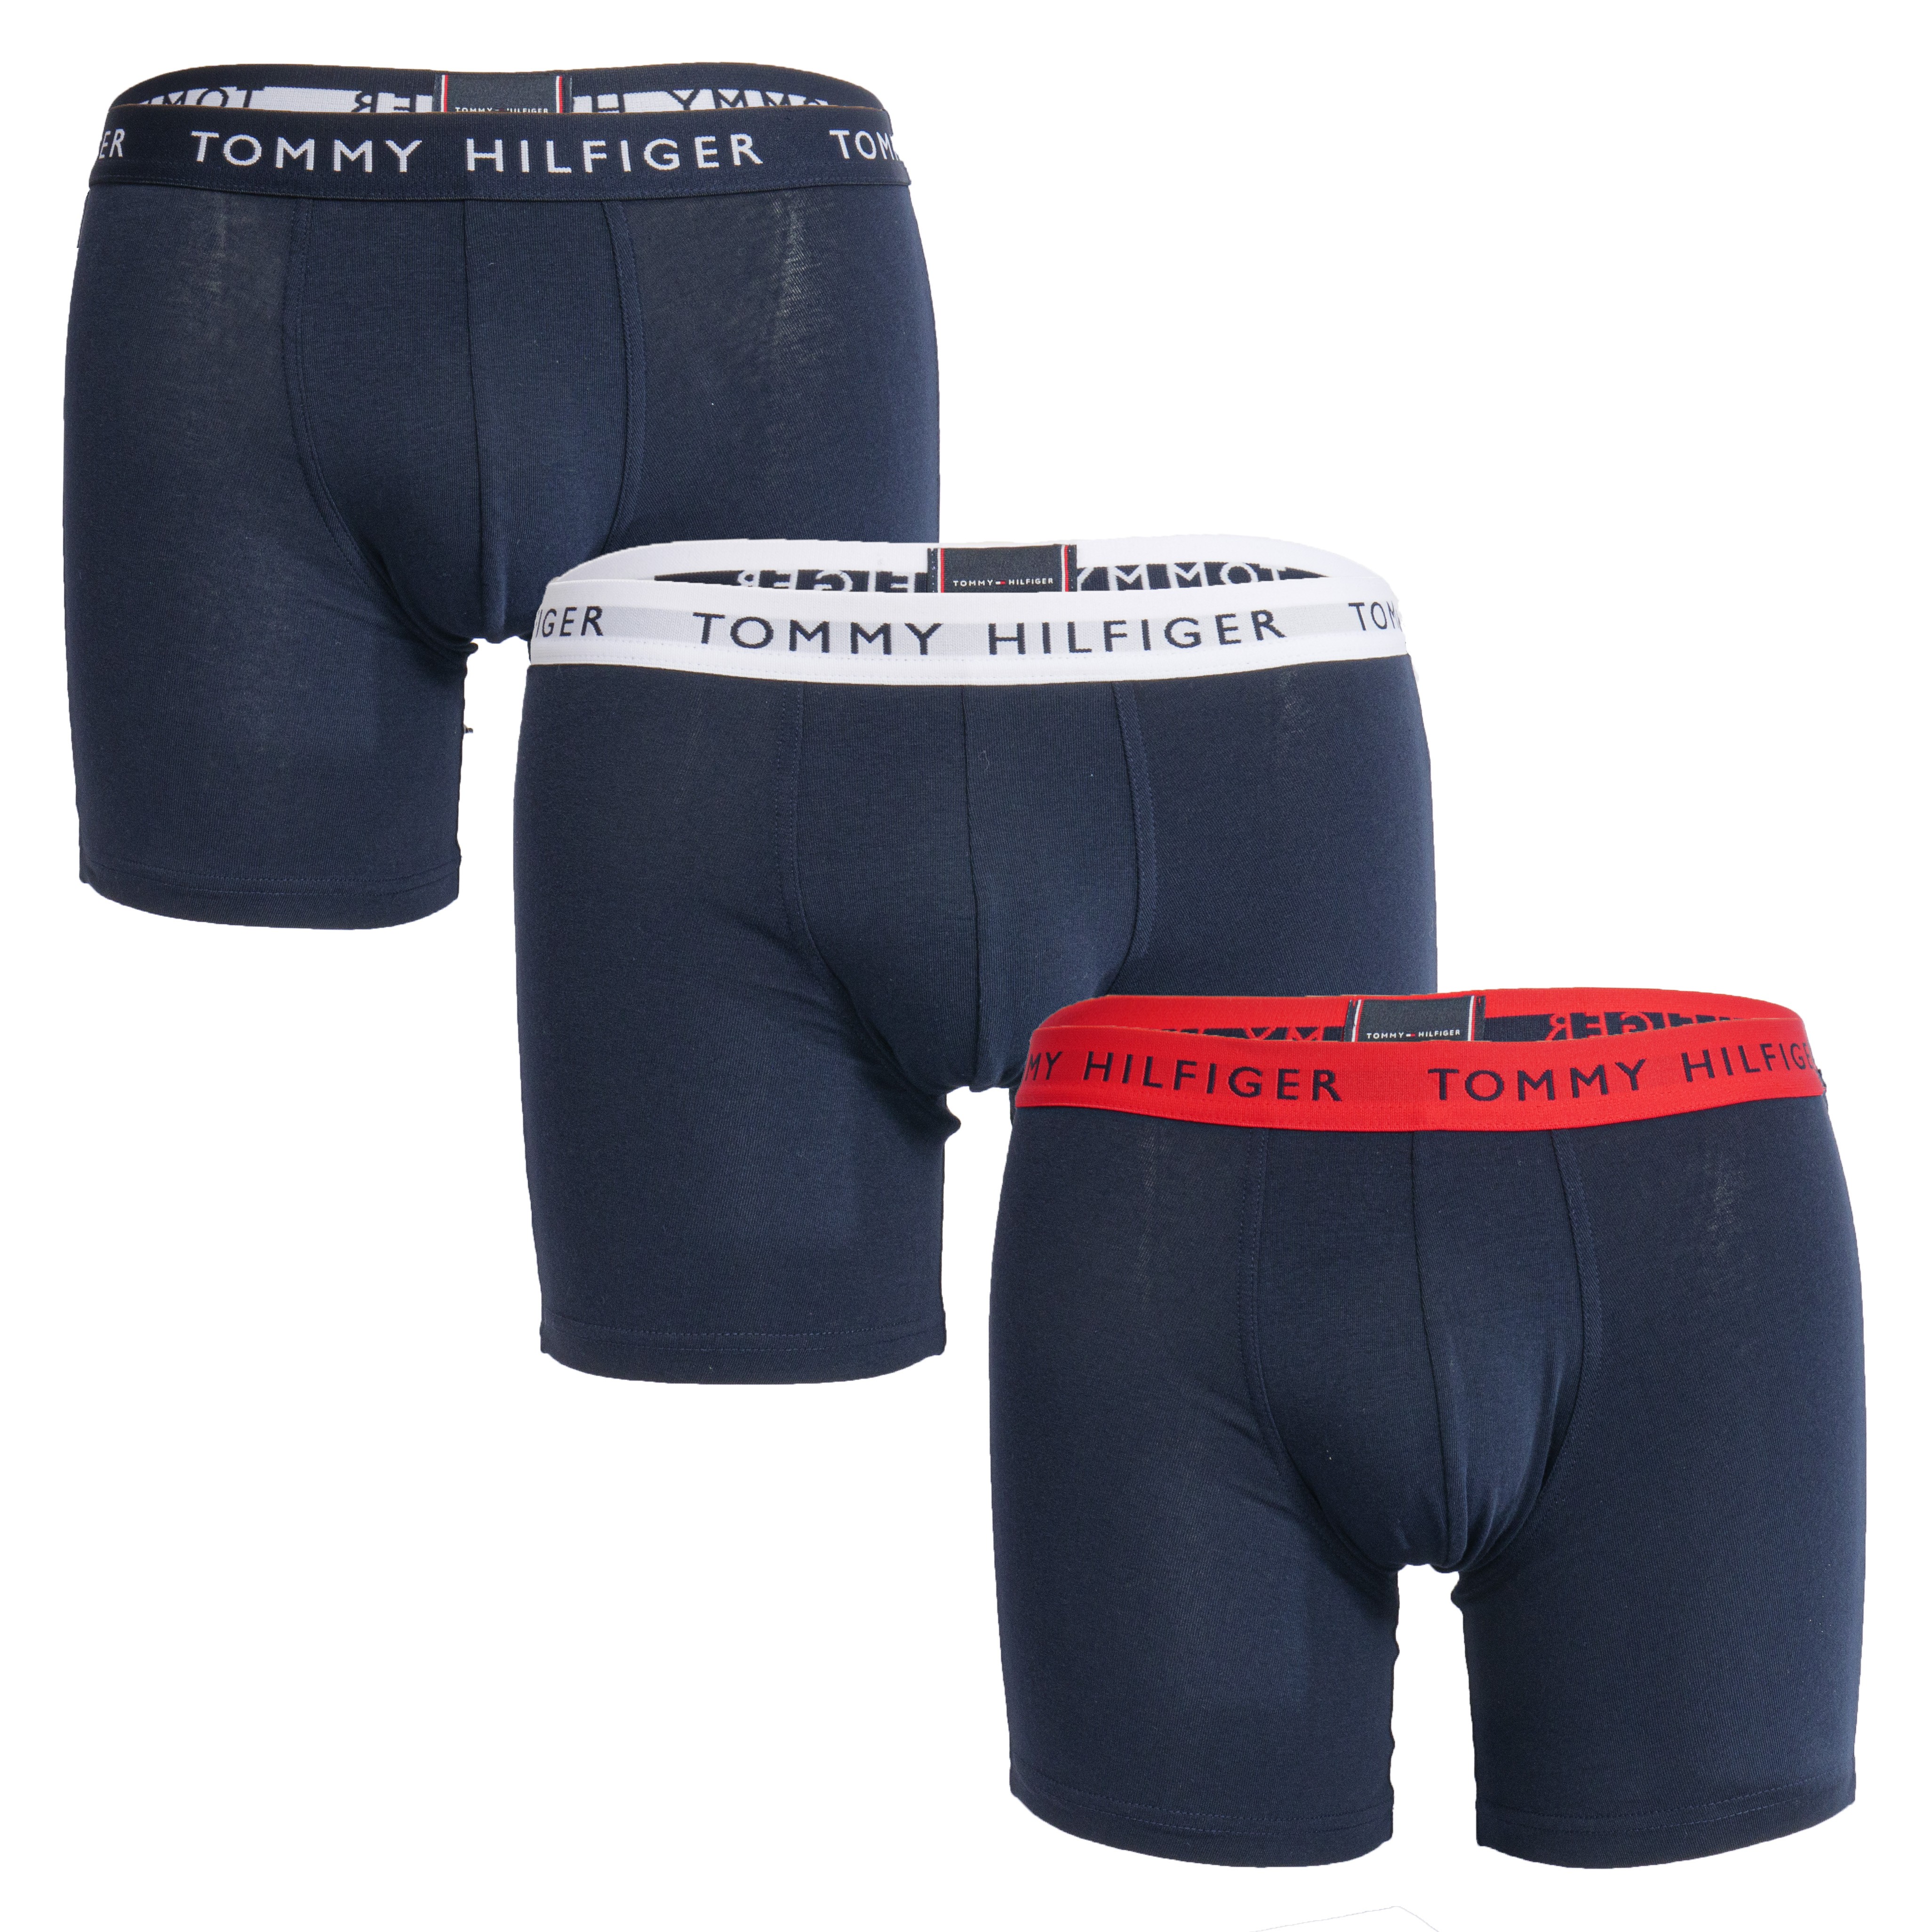 TOMMY HILFIGER 3-pack boxer shorts in white